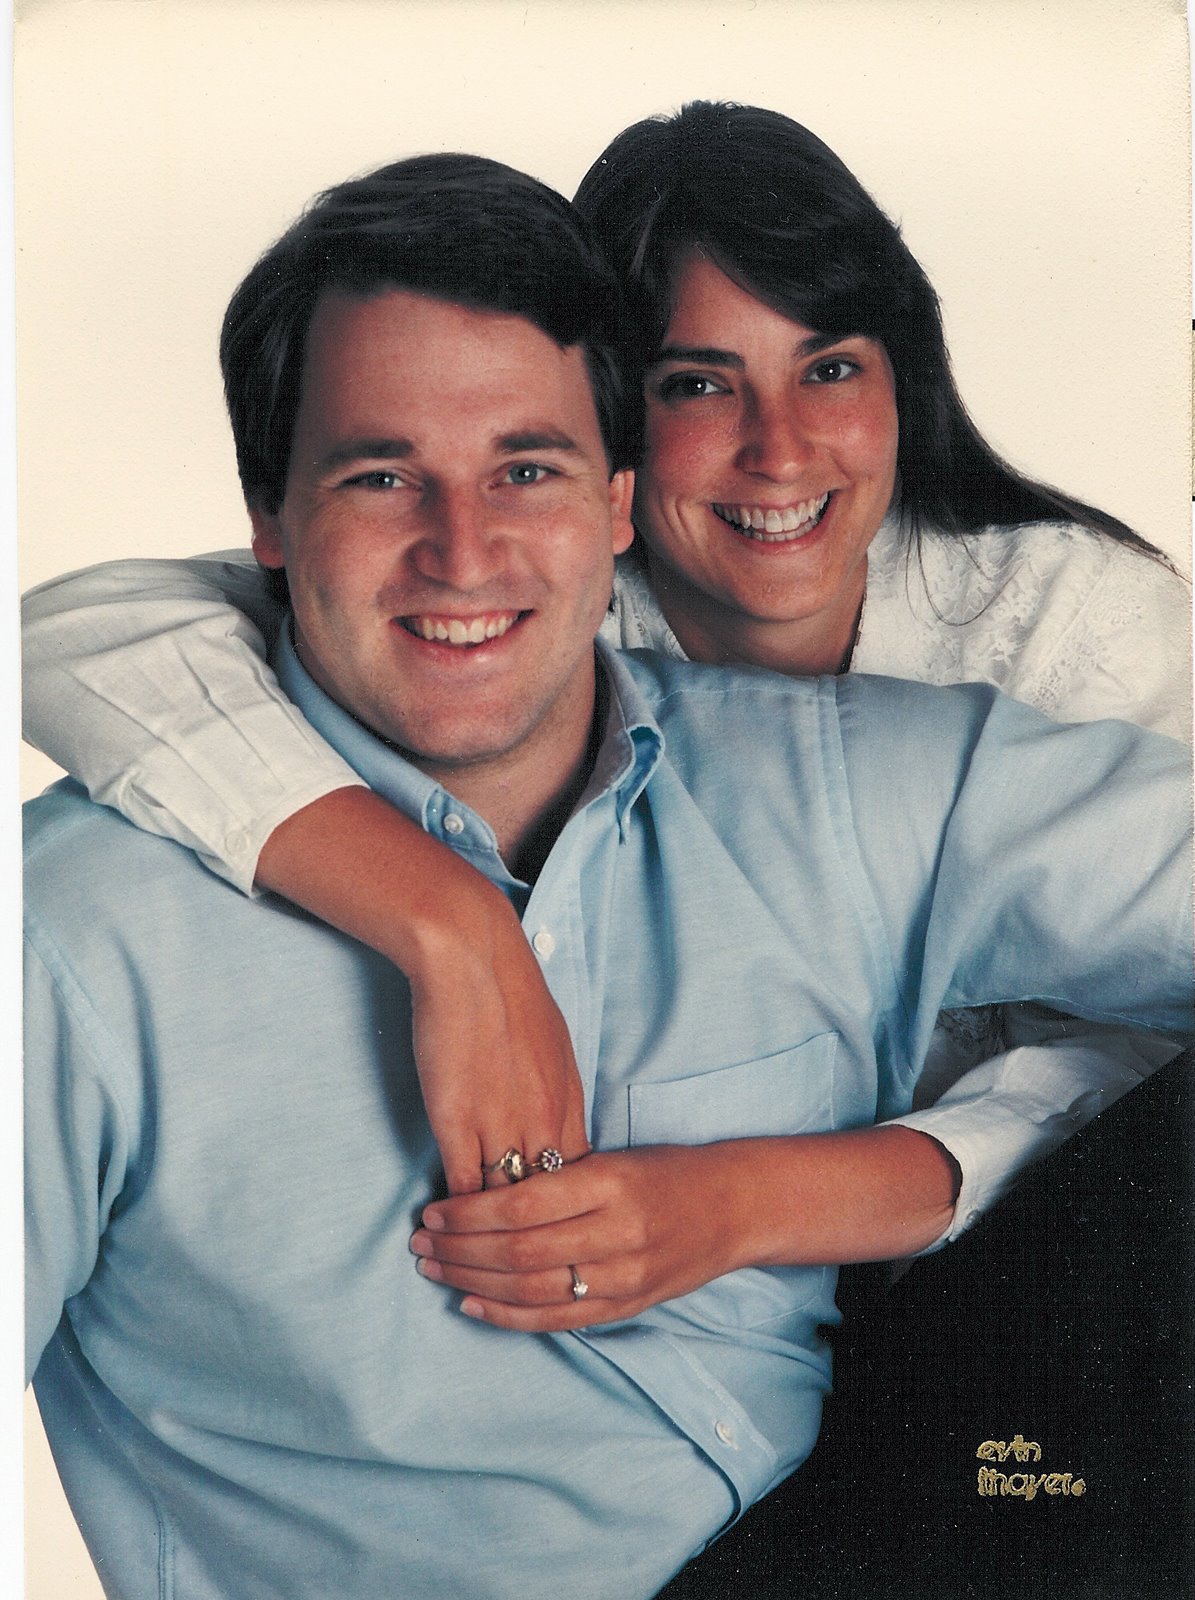 [Andy+and+Mary+Lynne+Engagement+Photo+1987+-+no+2.jpg]